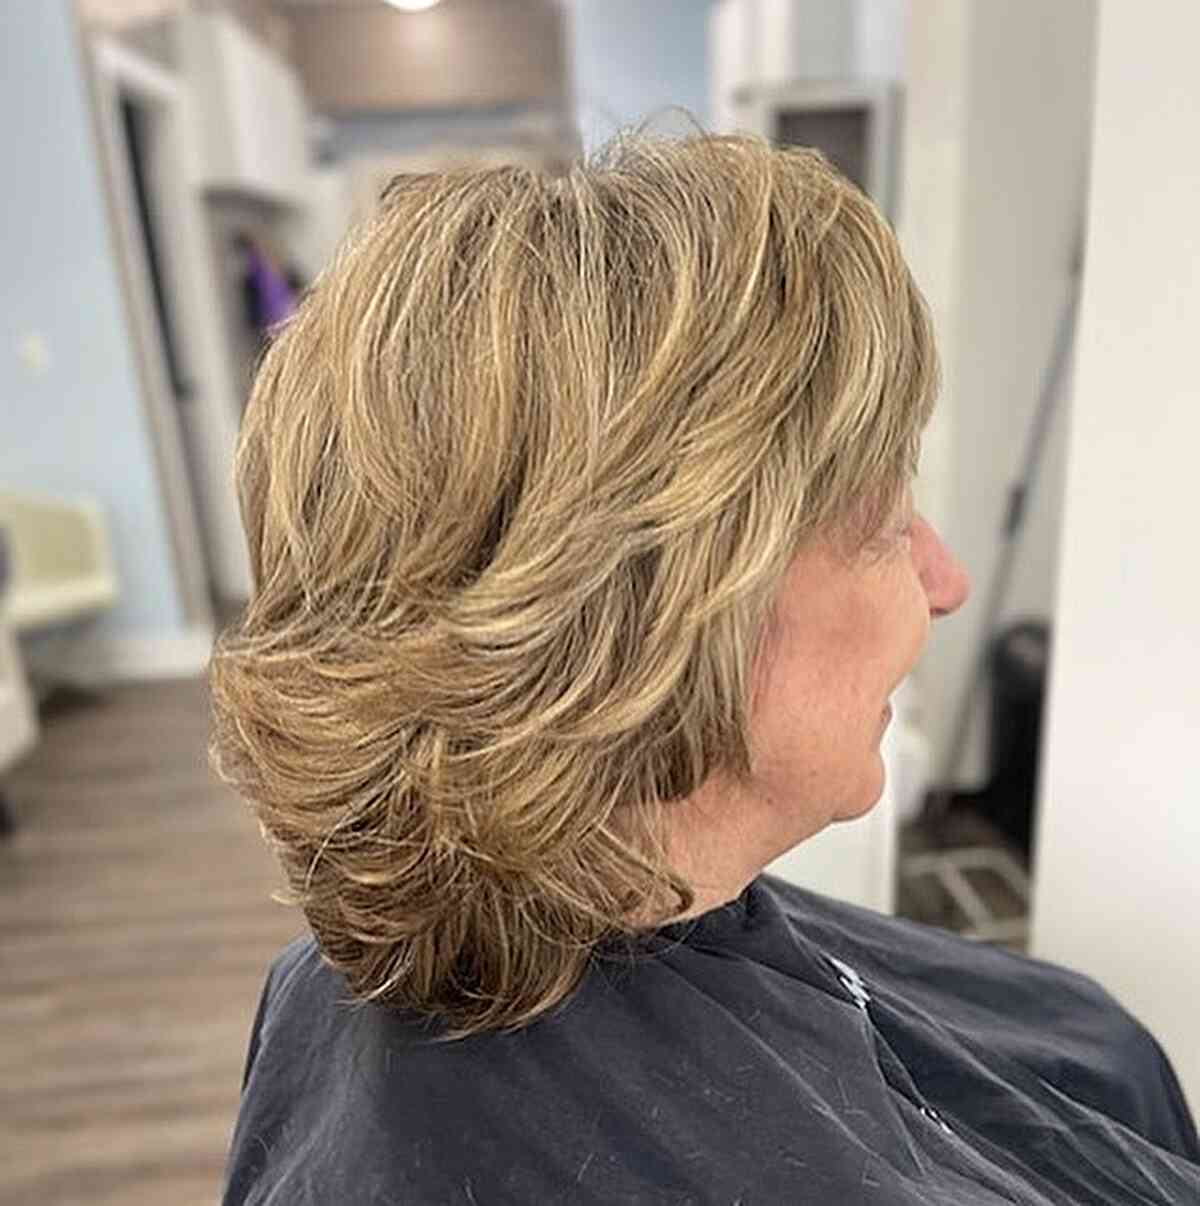 Highlights and a Feathered Cut for an Older Lady